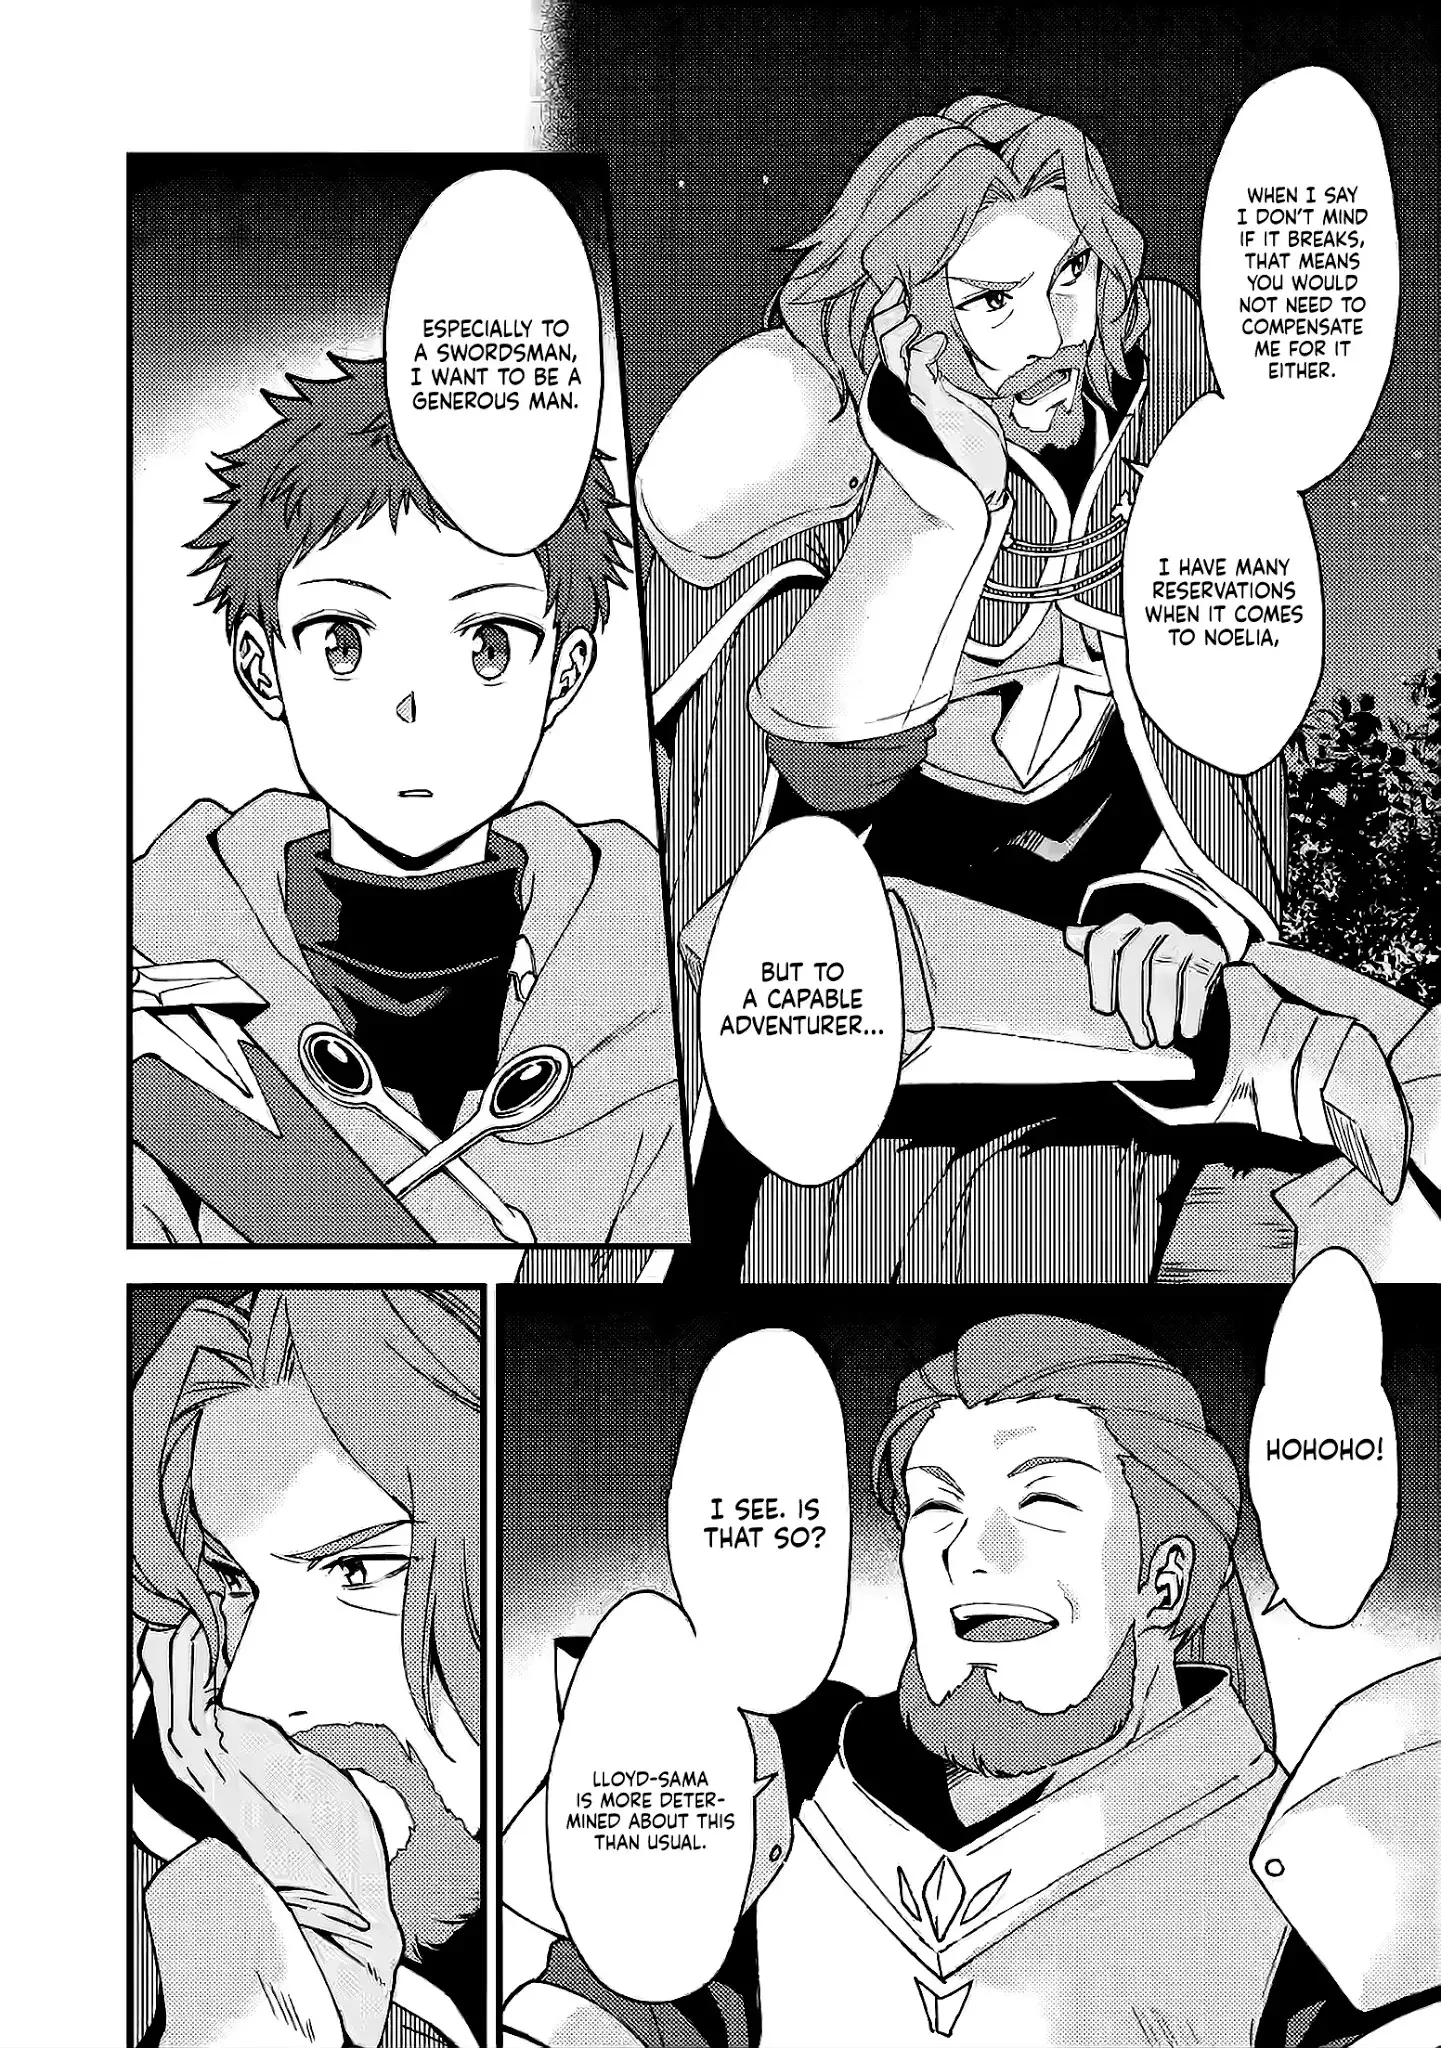 A Sword Master Childhood Friend Power Harassed Me Harshly, So I Broke Off Our Relationship And Make A Fresh Start At The Frontier As A Magic Swordsman. - 6 page 27